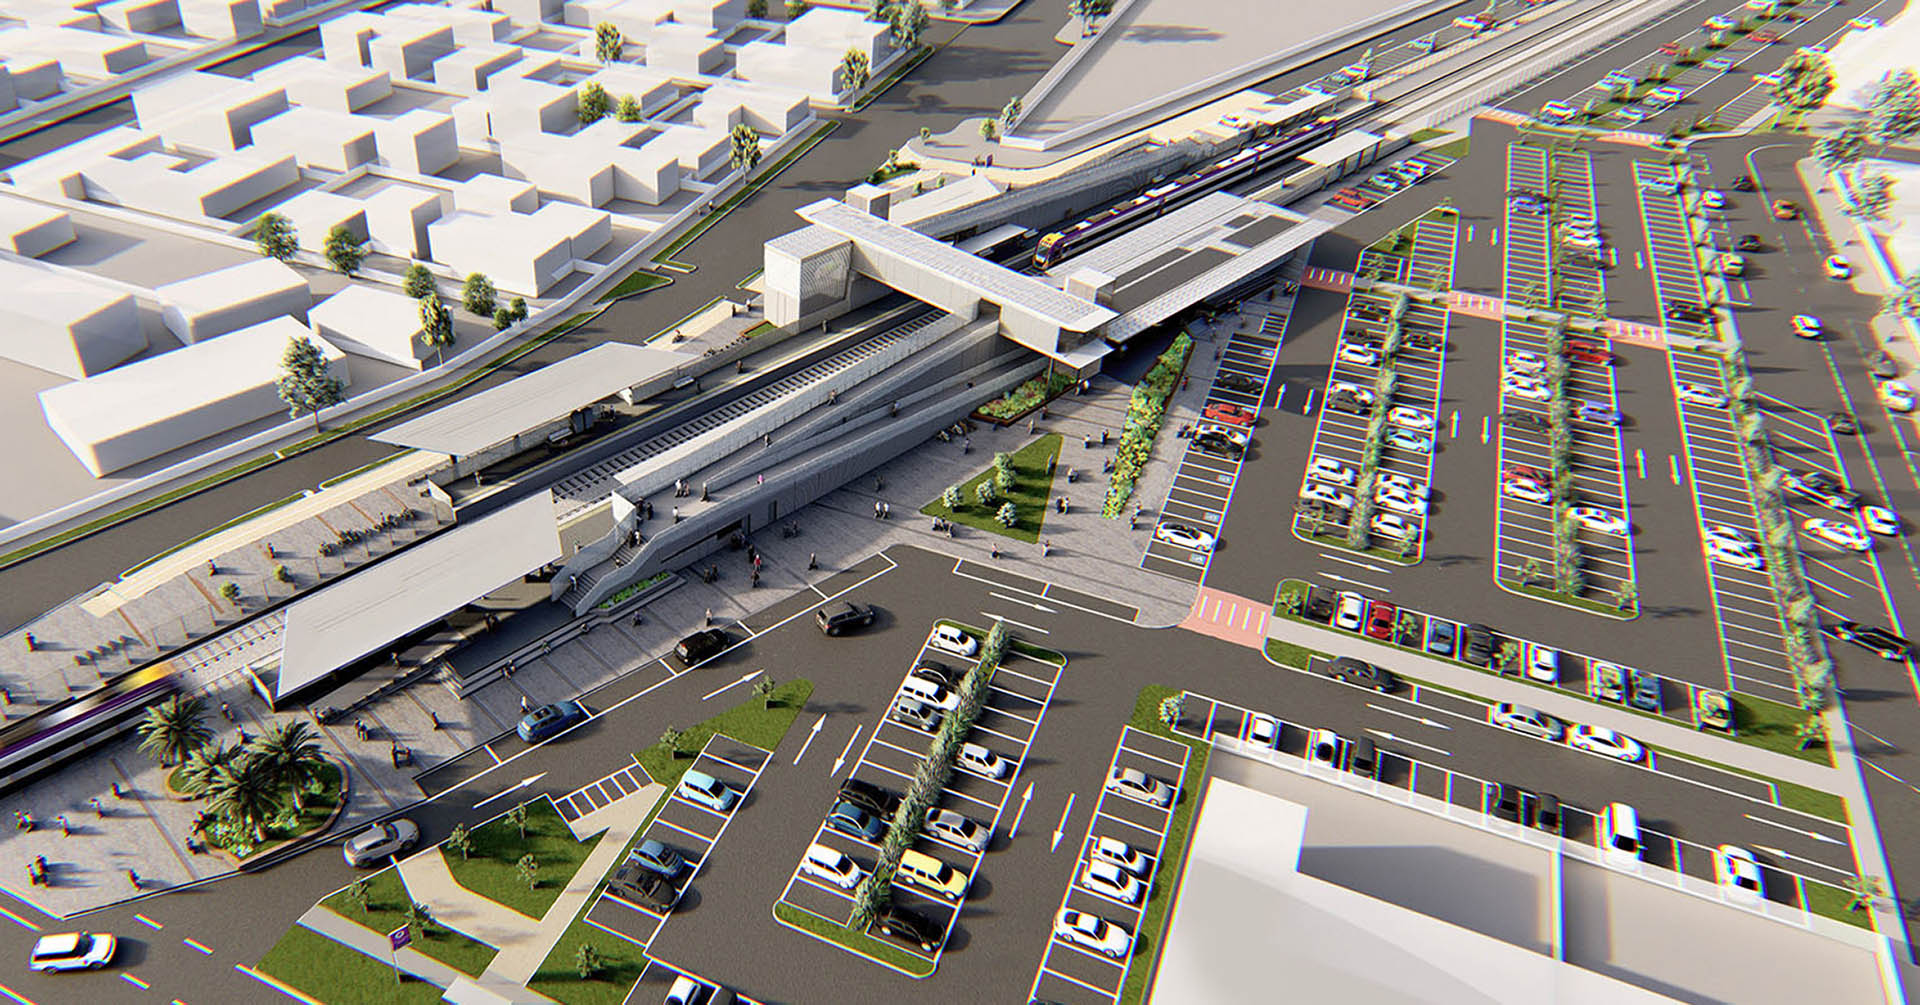 concept image of South Geelong Station from an aerial perspective from Yarra Street. The foreground of this image features the car park on the southern side of the station with access from Yarra Street. The middle ground features the new station complex, including the new overpass and station forecourt area. 